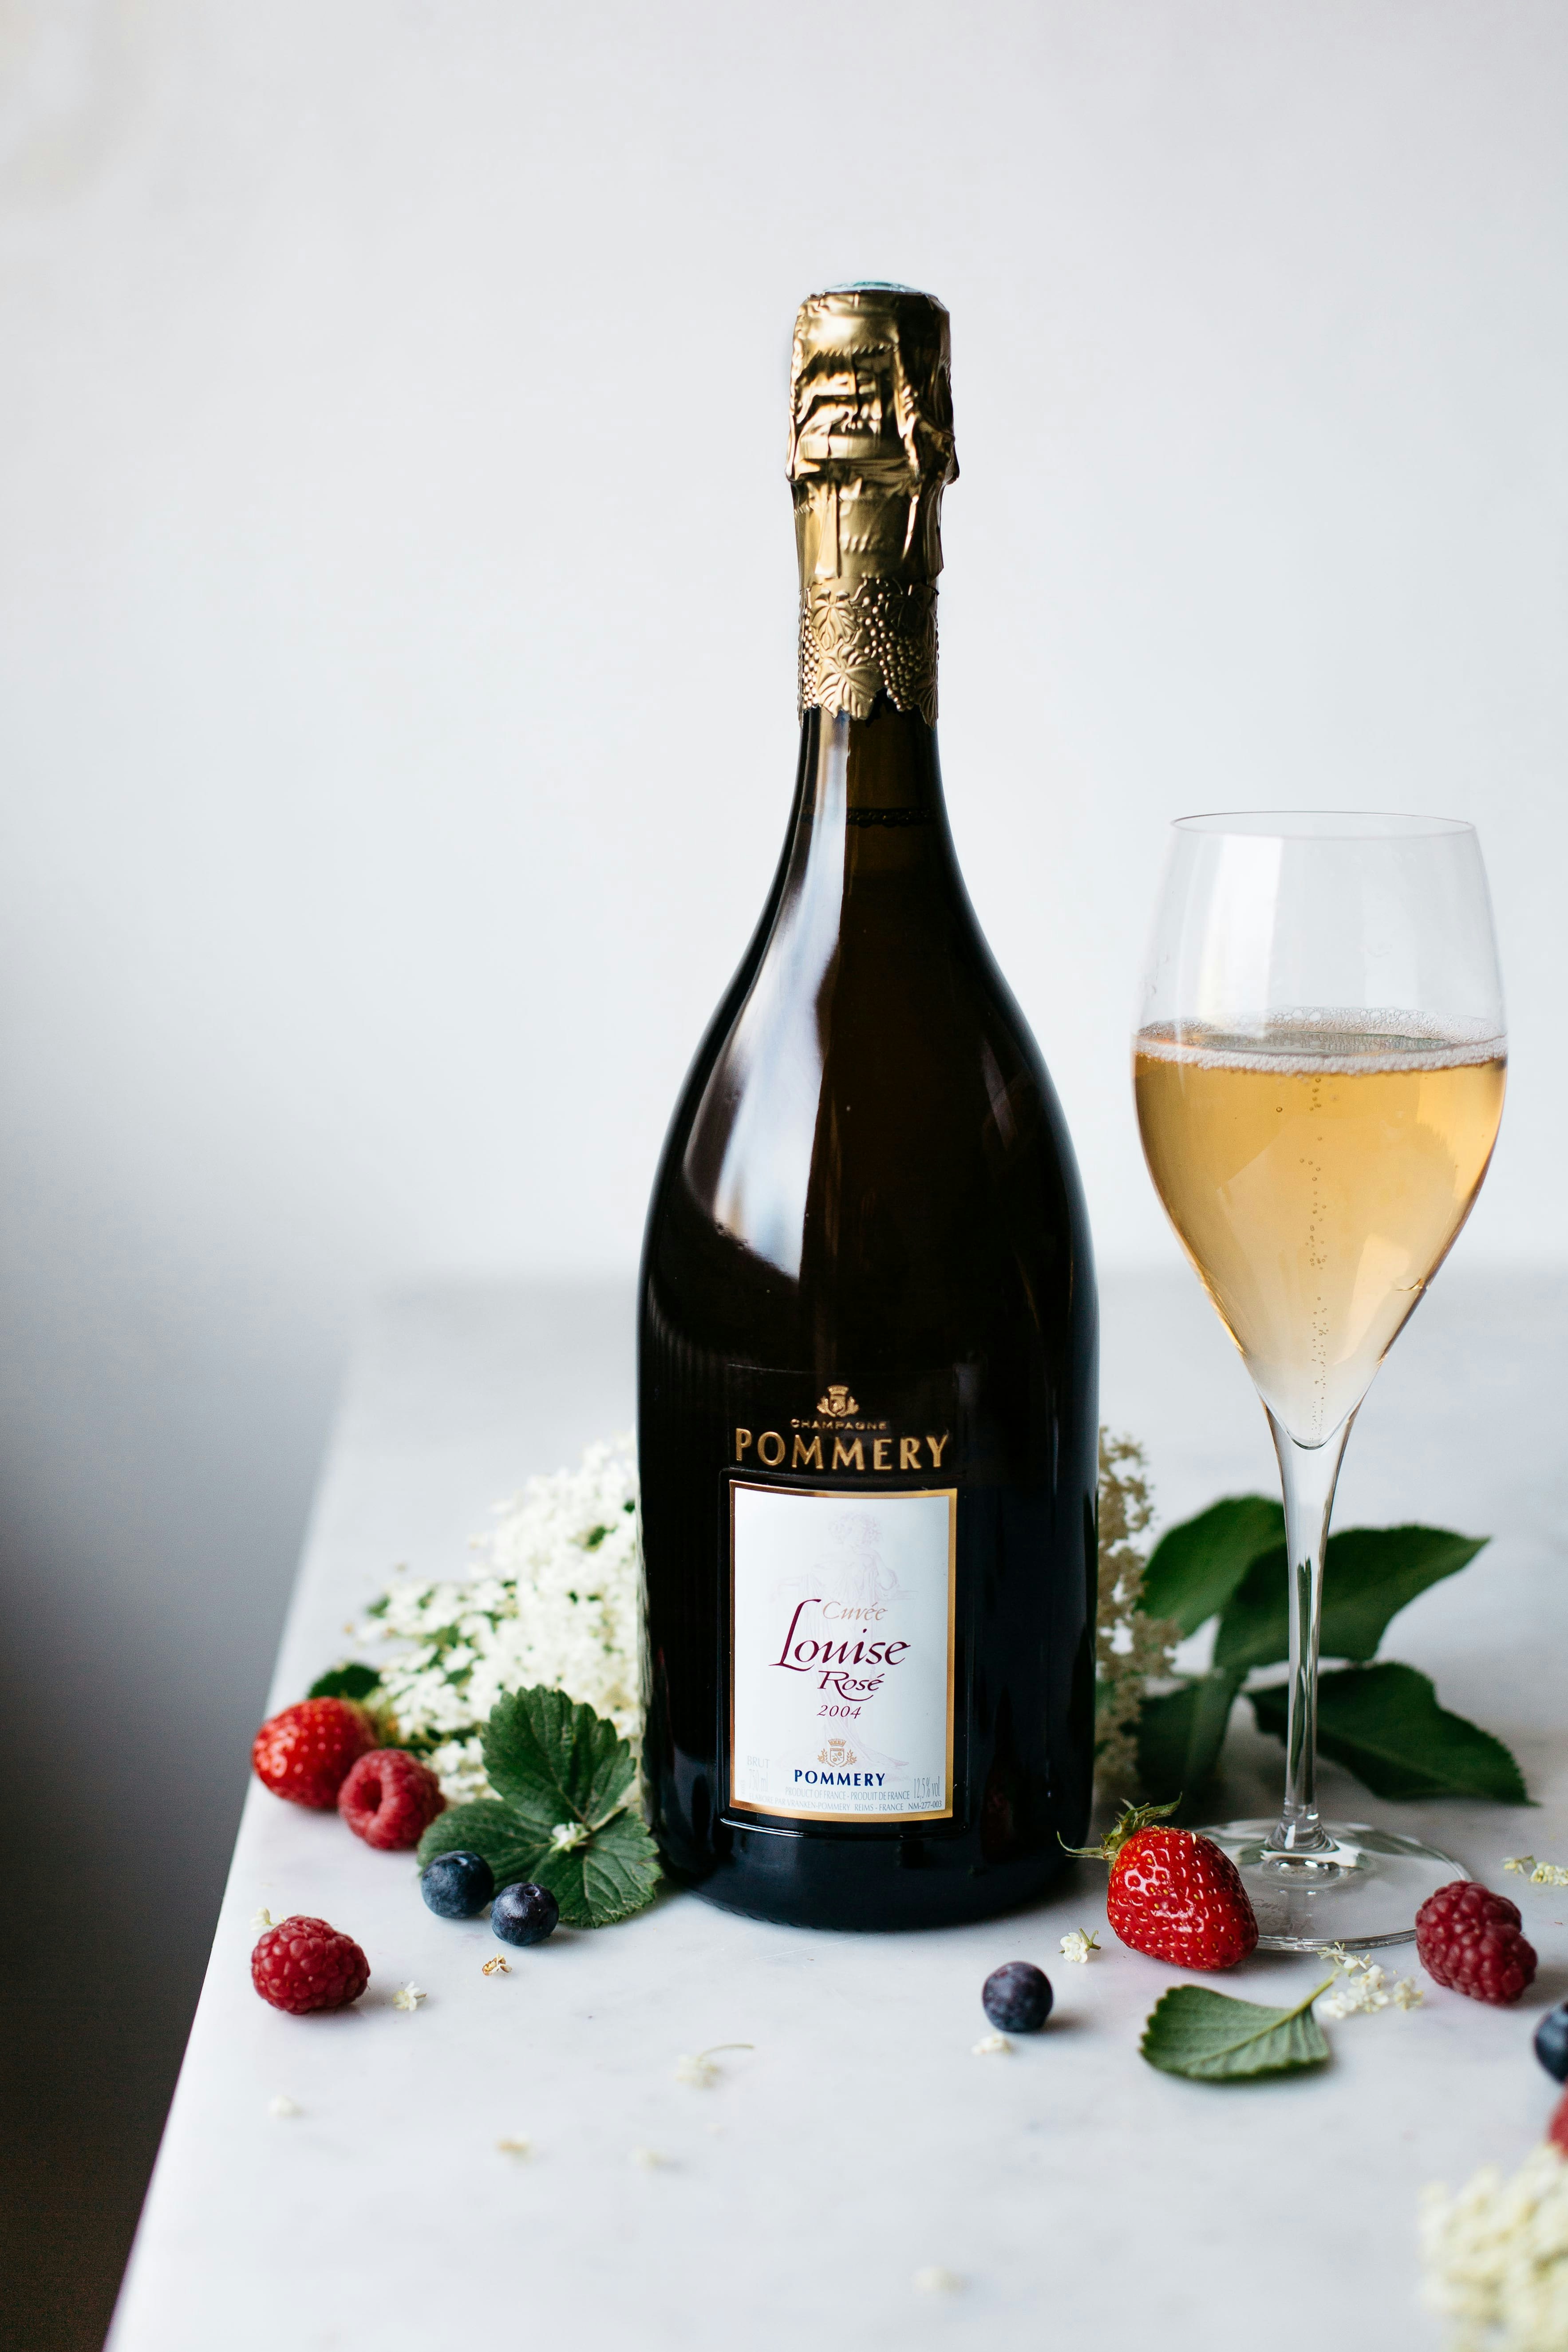 Bottle of Pommery Louise rosé 2004 75cl with glass and fruits